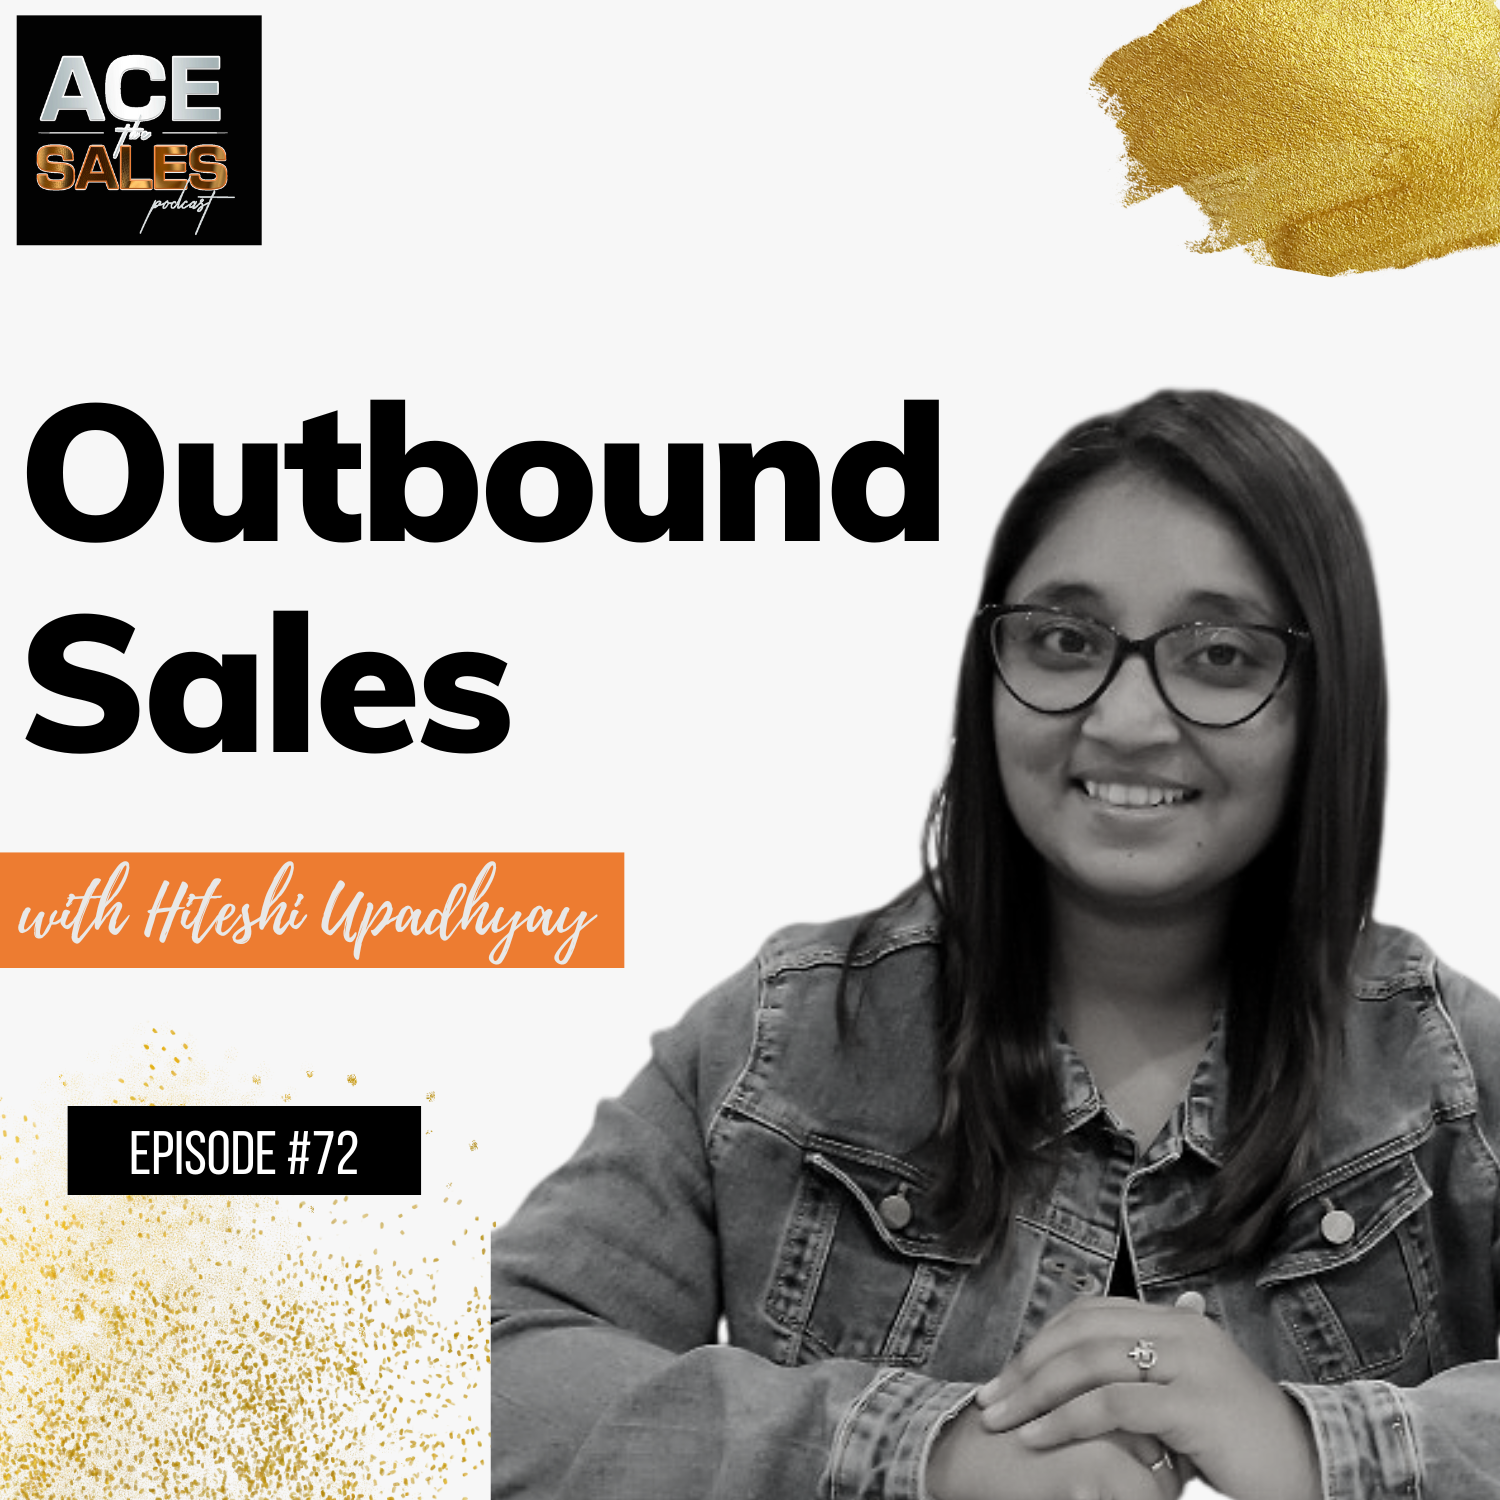 How to rock outbound sales? - Hiteshi Upadhyay